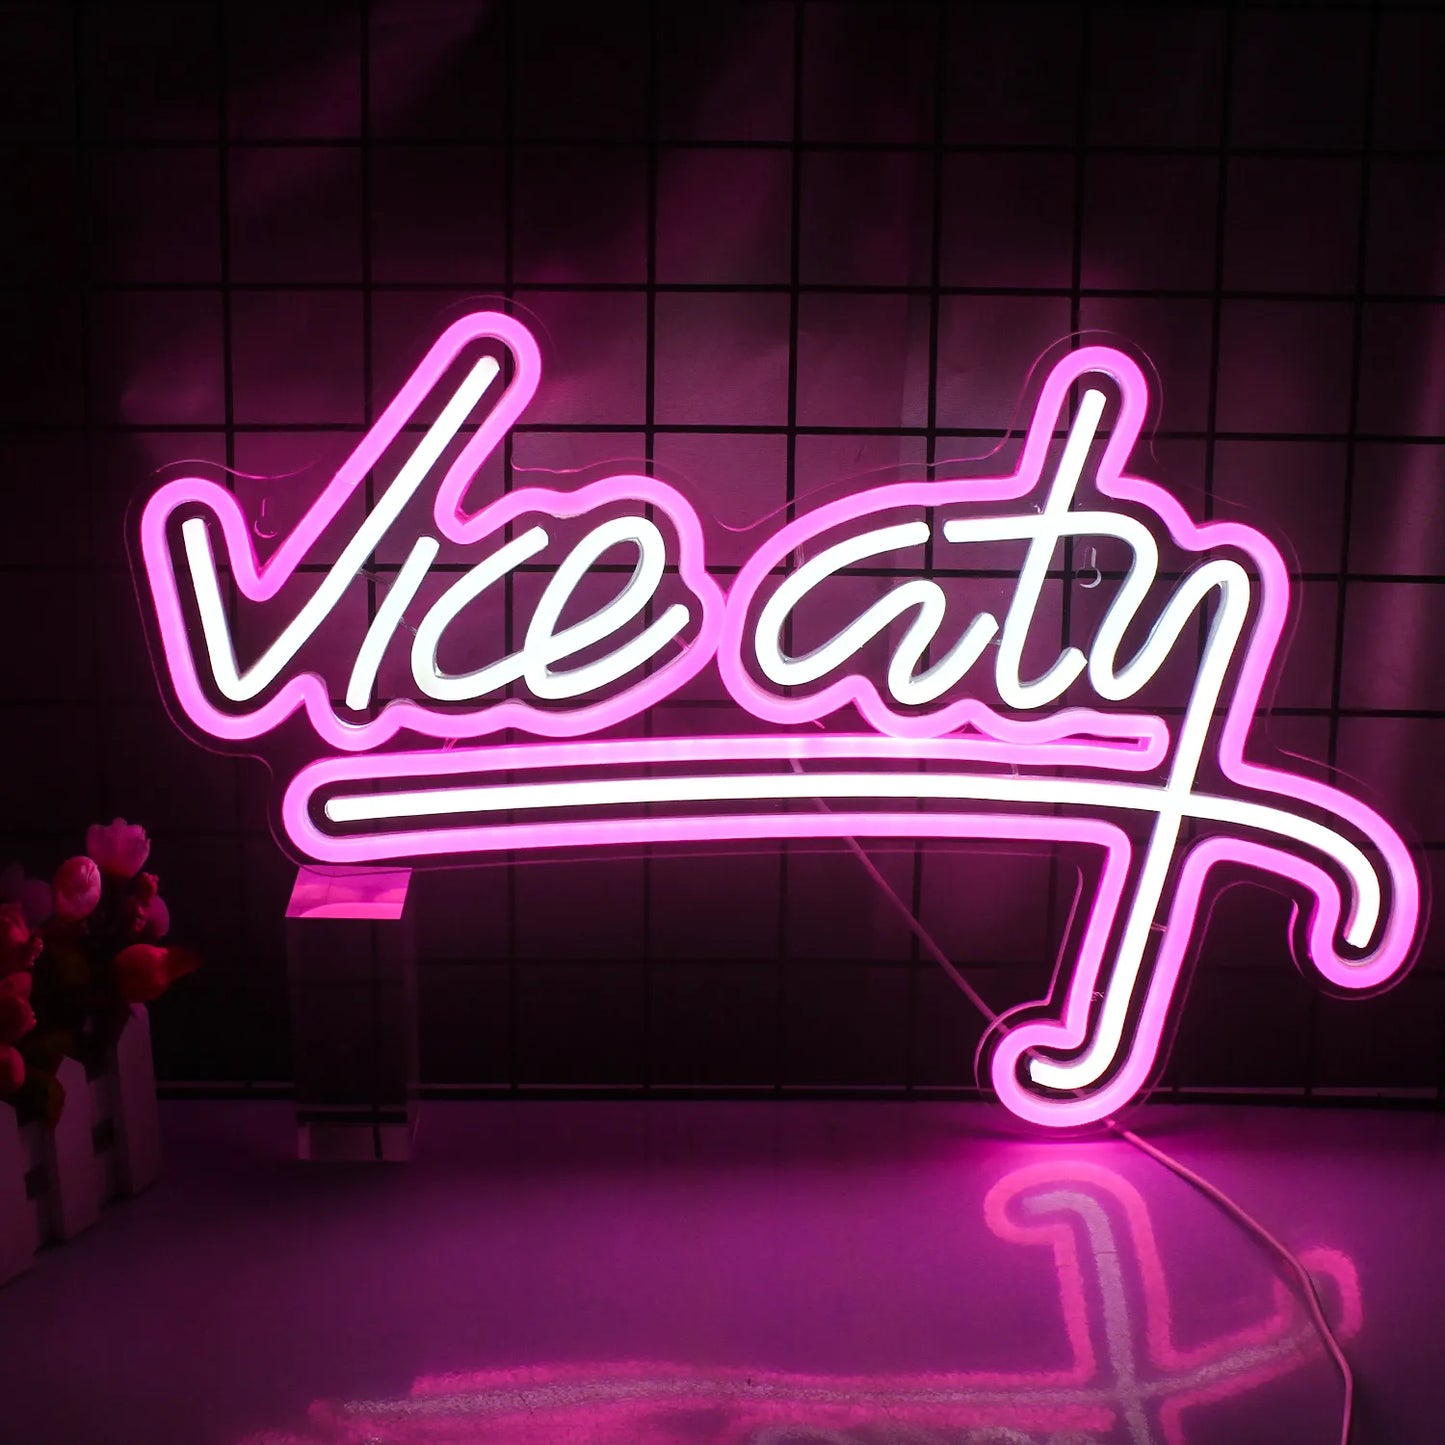 Wanxing Vice City Neon Sign Pink Led Lights Bedroom Letters Game Room Bar Party Indoor Home Arcade Shop Cave Art Wall Decoration